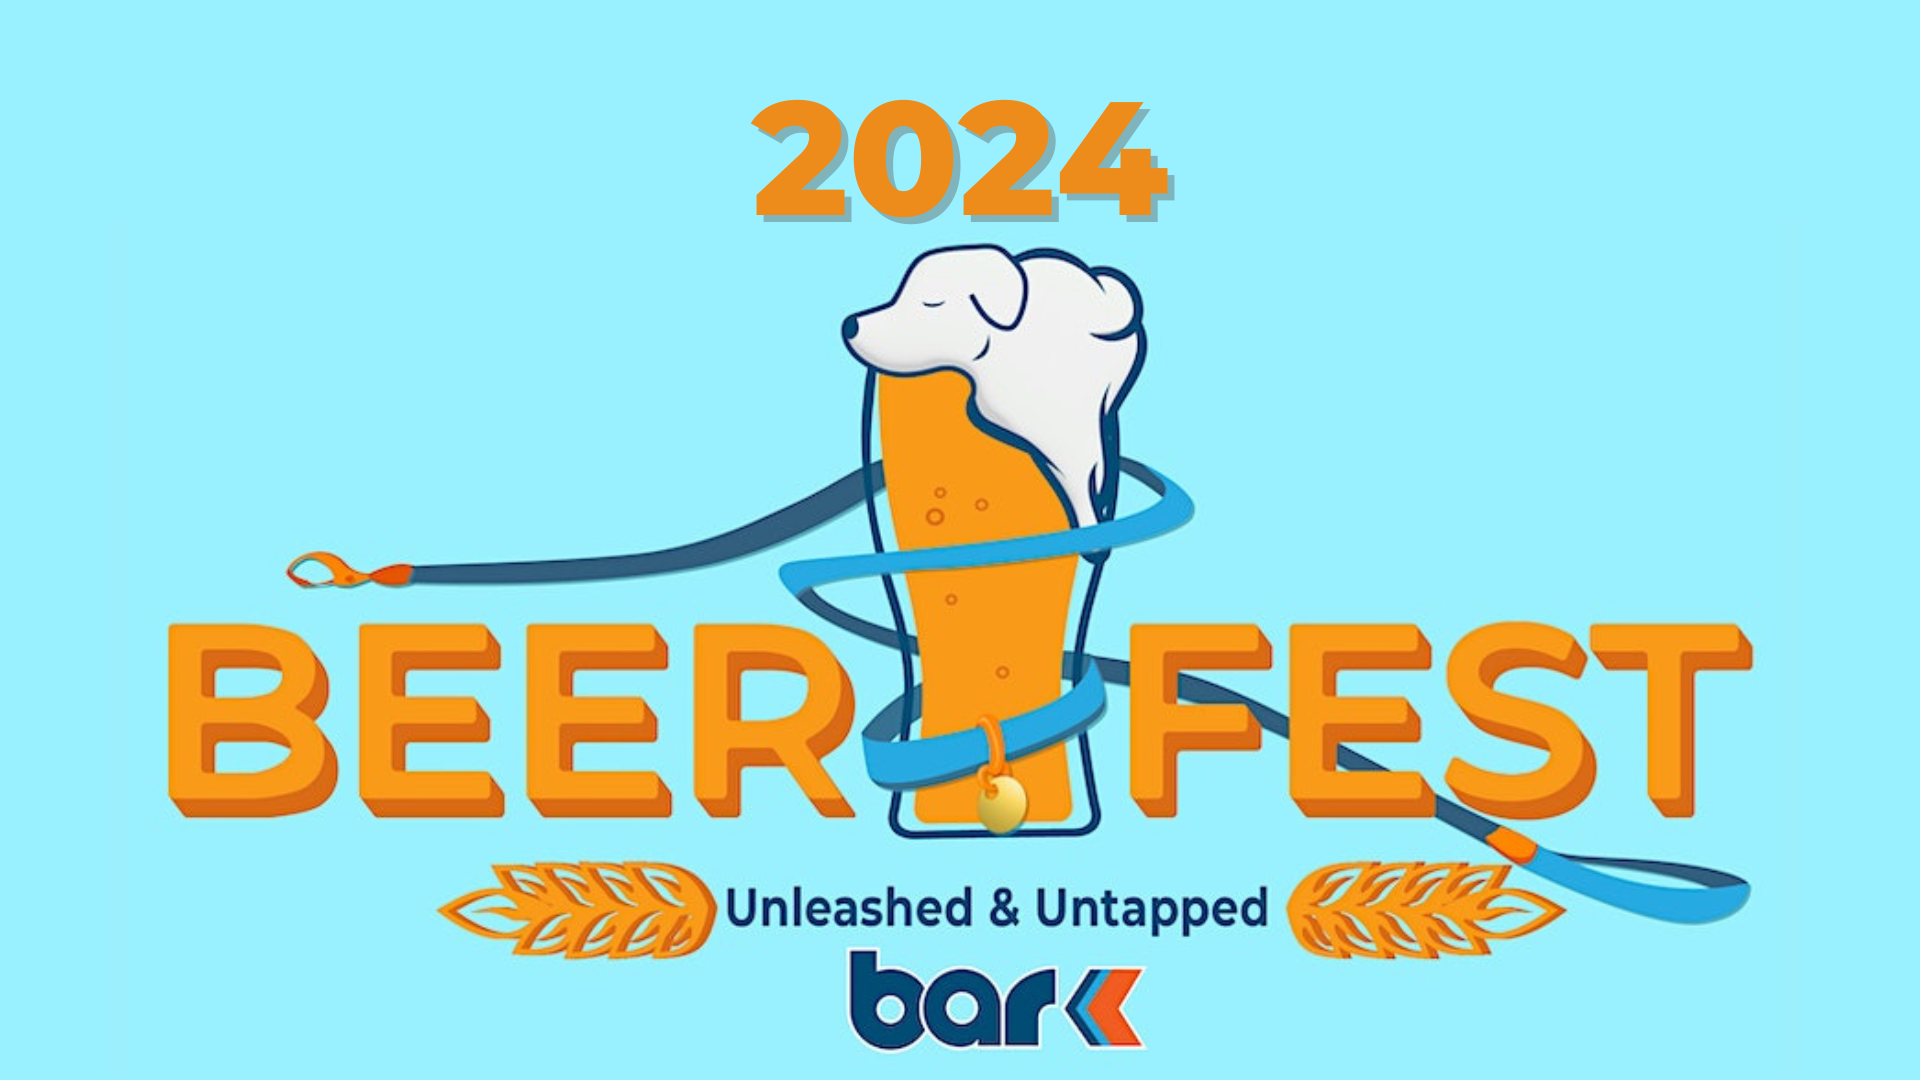 2024 beerfest. Unleashed and untapped at Bar k